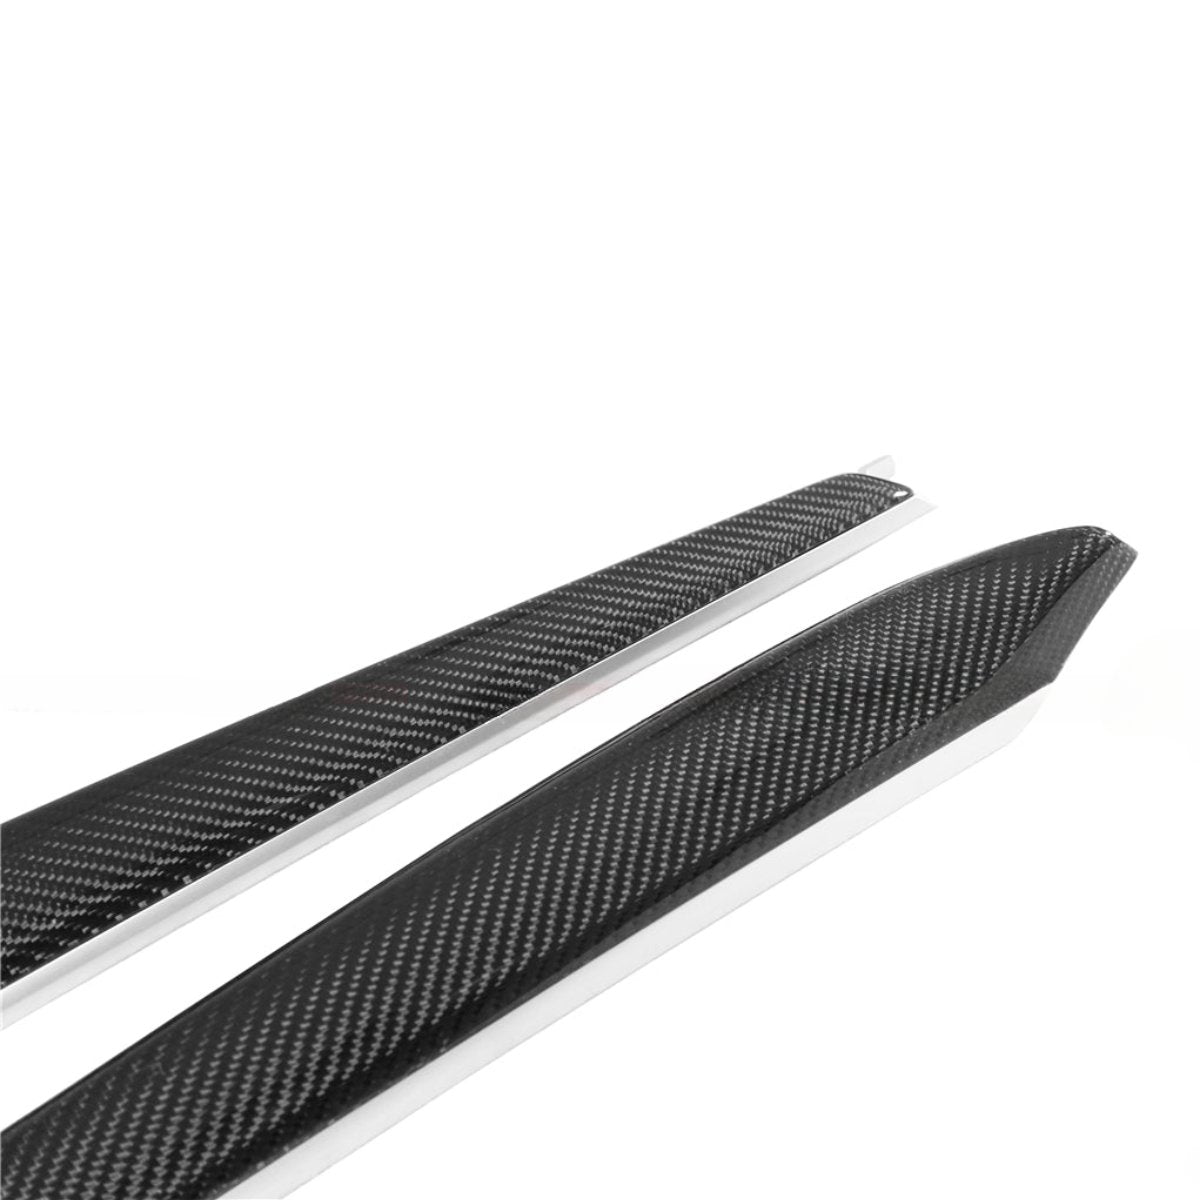 Repalcement Real Carbon Fiber Front Door Trim Panel for Model 3 / Y 2021-2023 - Tesery Official Store